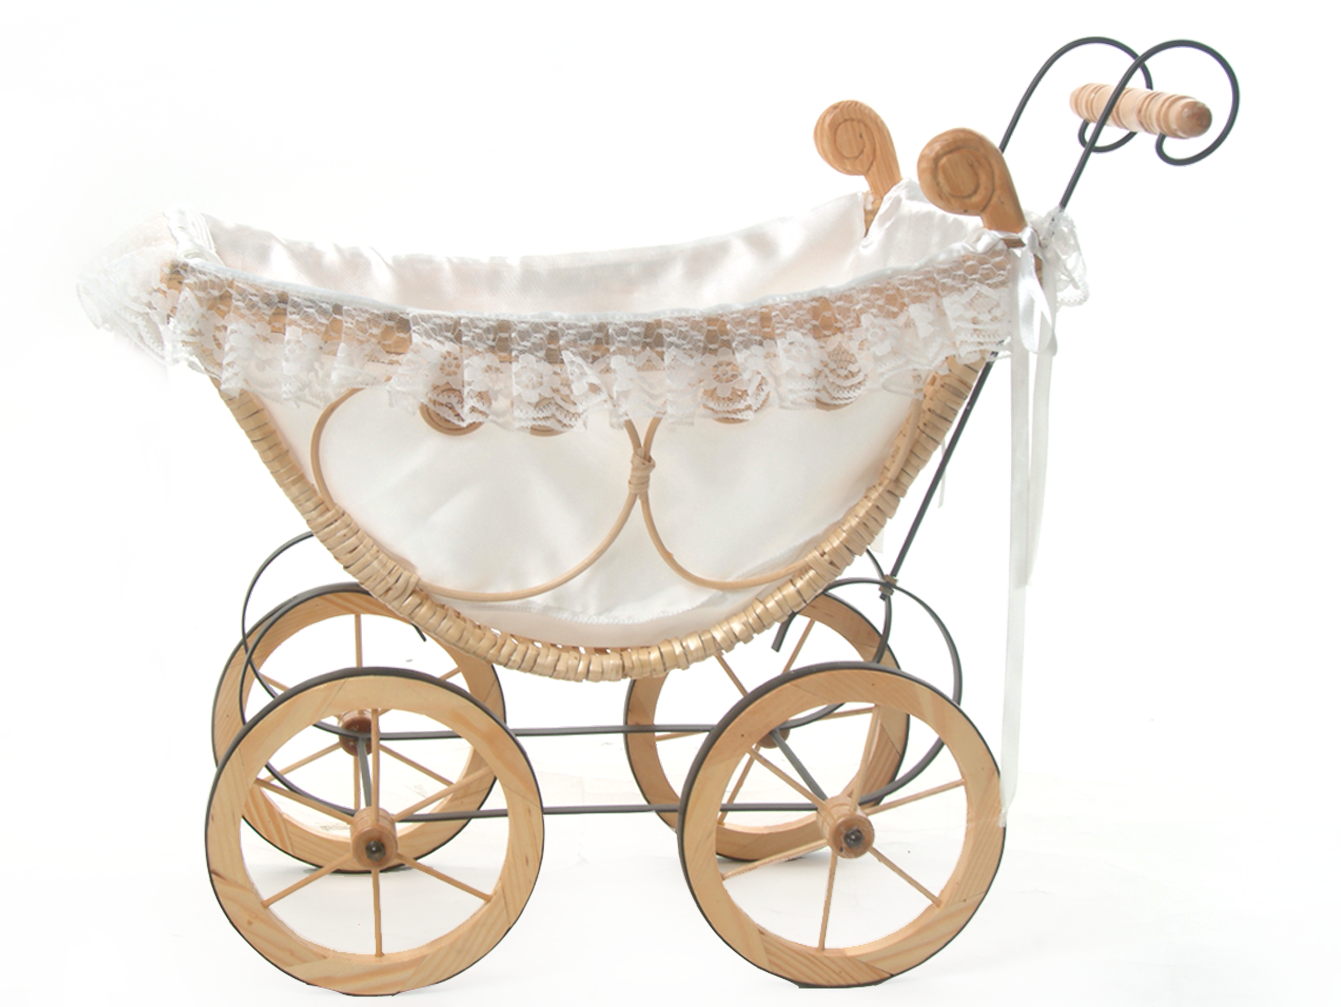 Baby Transport Download Infant Bed - Baby Transport Download Infant Bed (1341x1007)